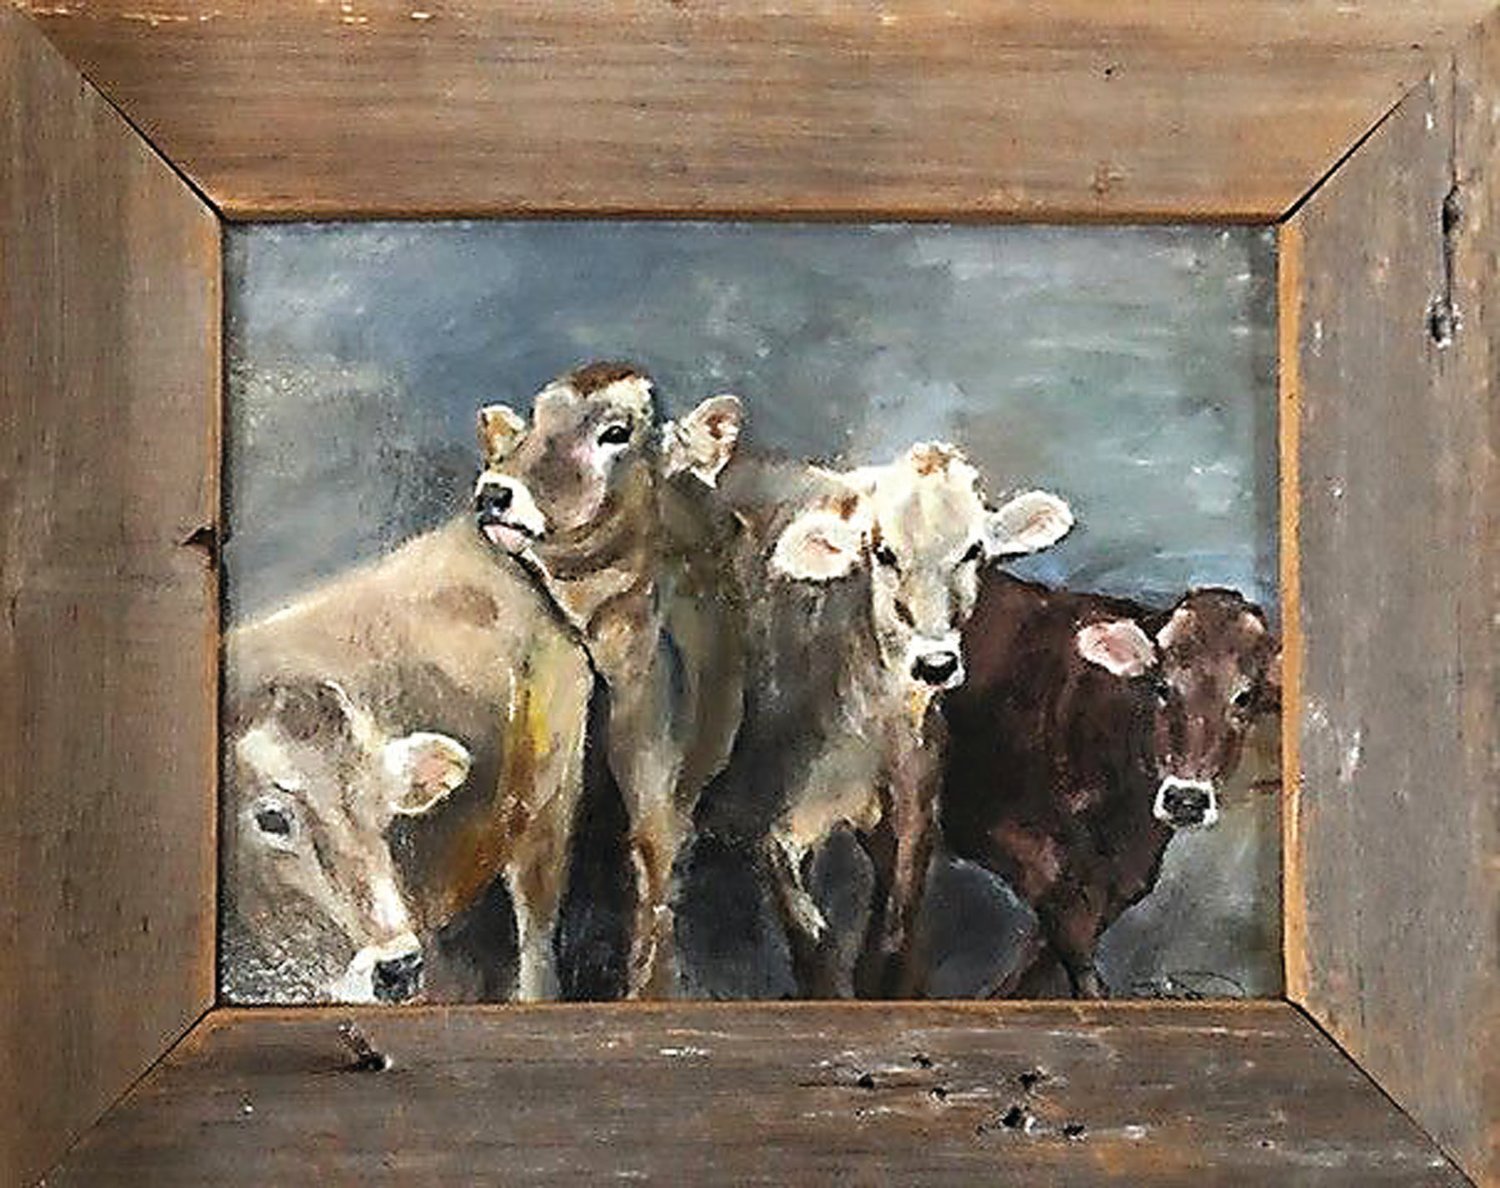 Susan W. Dryfoos exhibits at Stover Mill Gallery for the month of October.